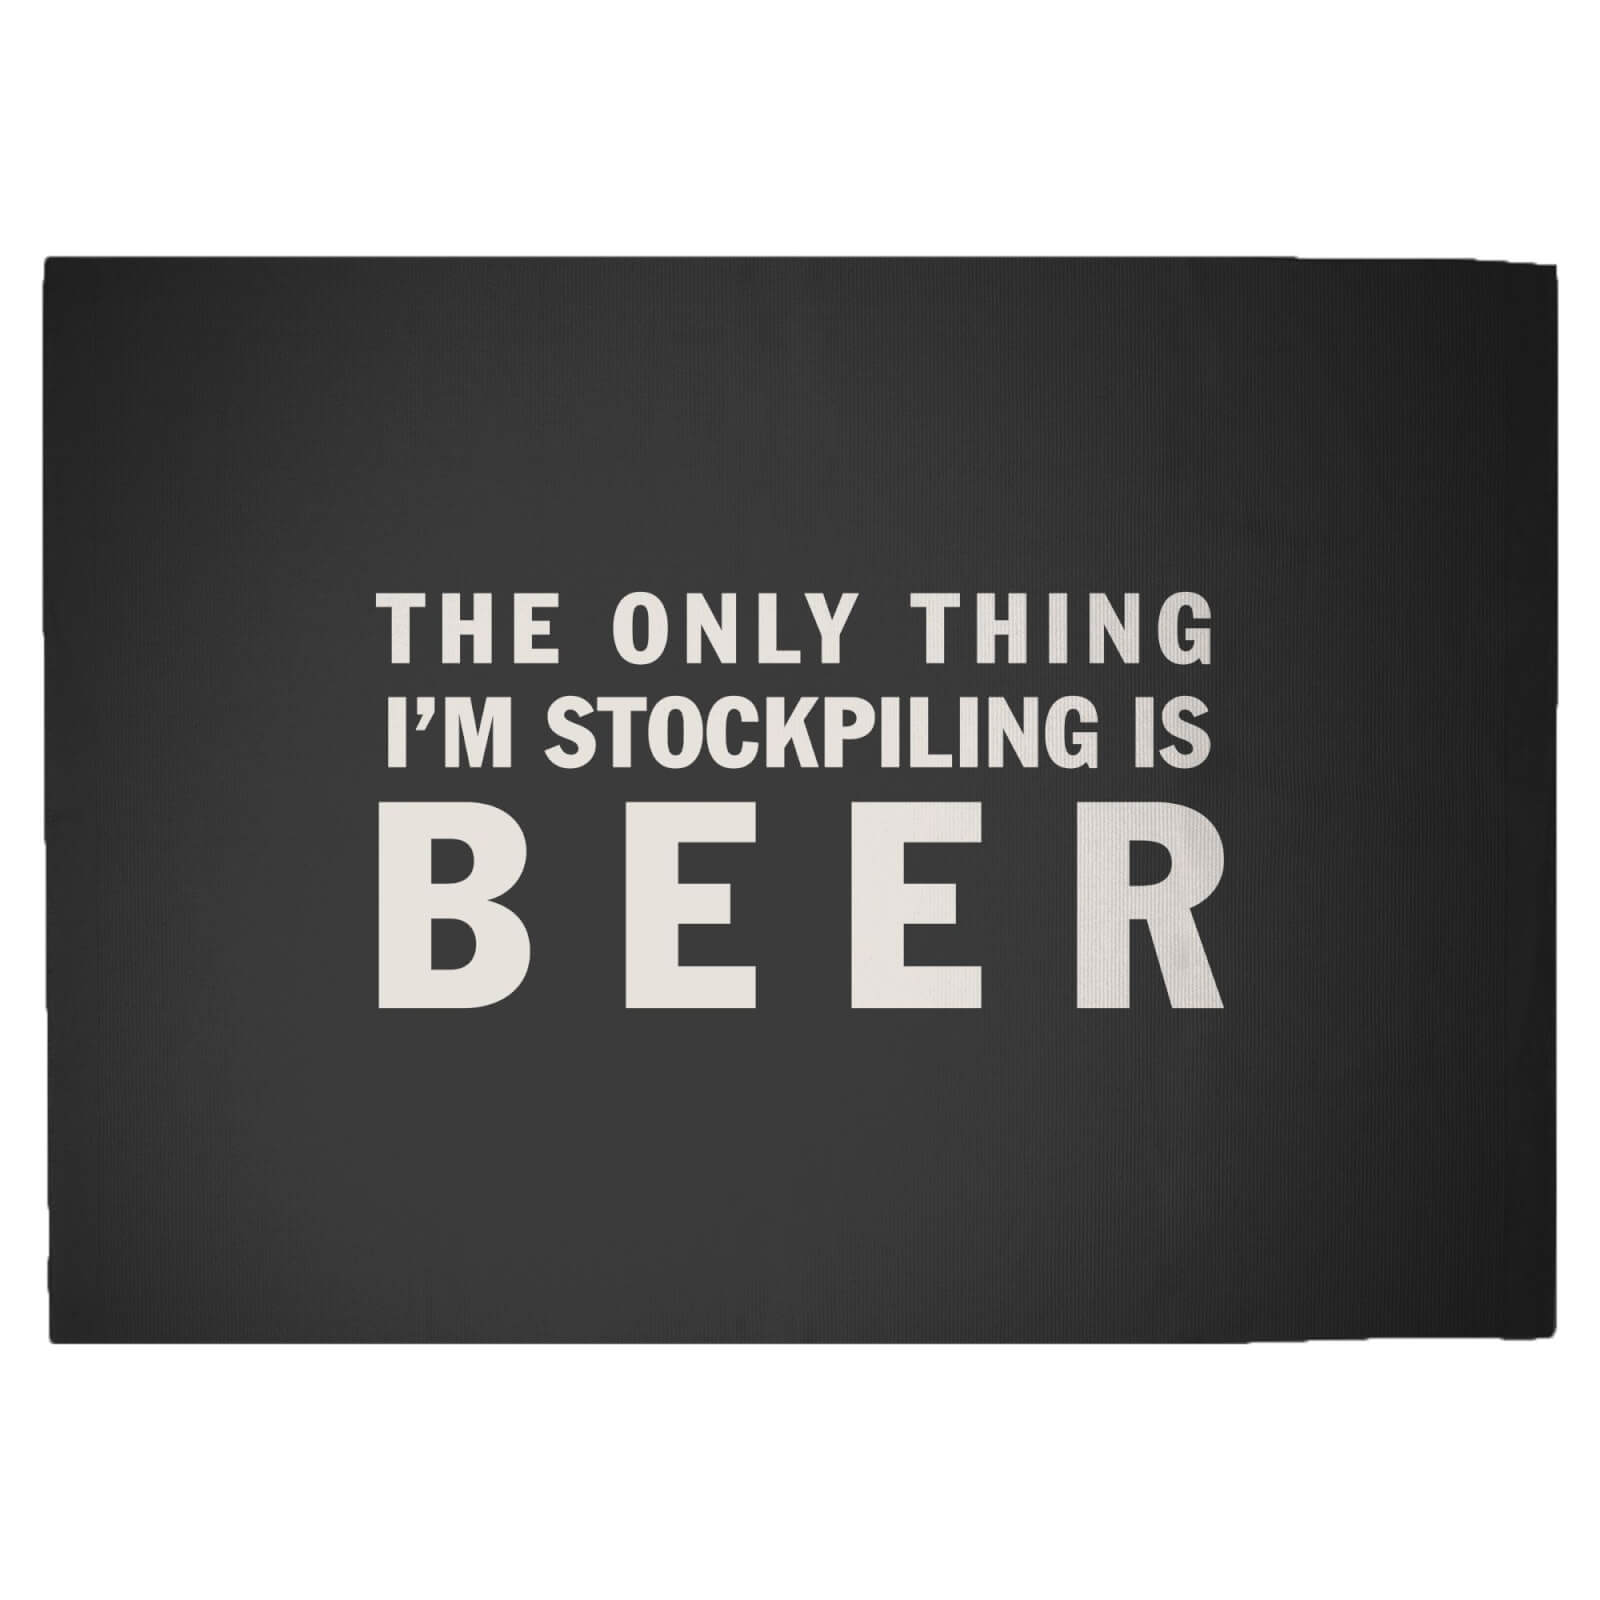 The Only Thing I'm Stockpiling Is Beer Woven Rug - Large